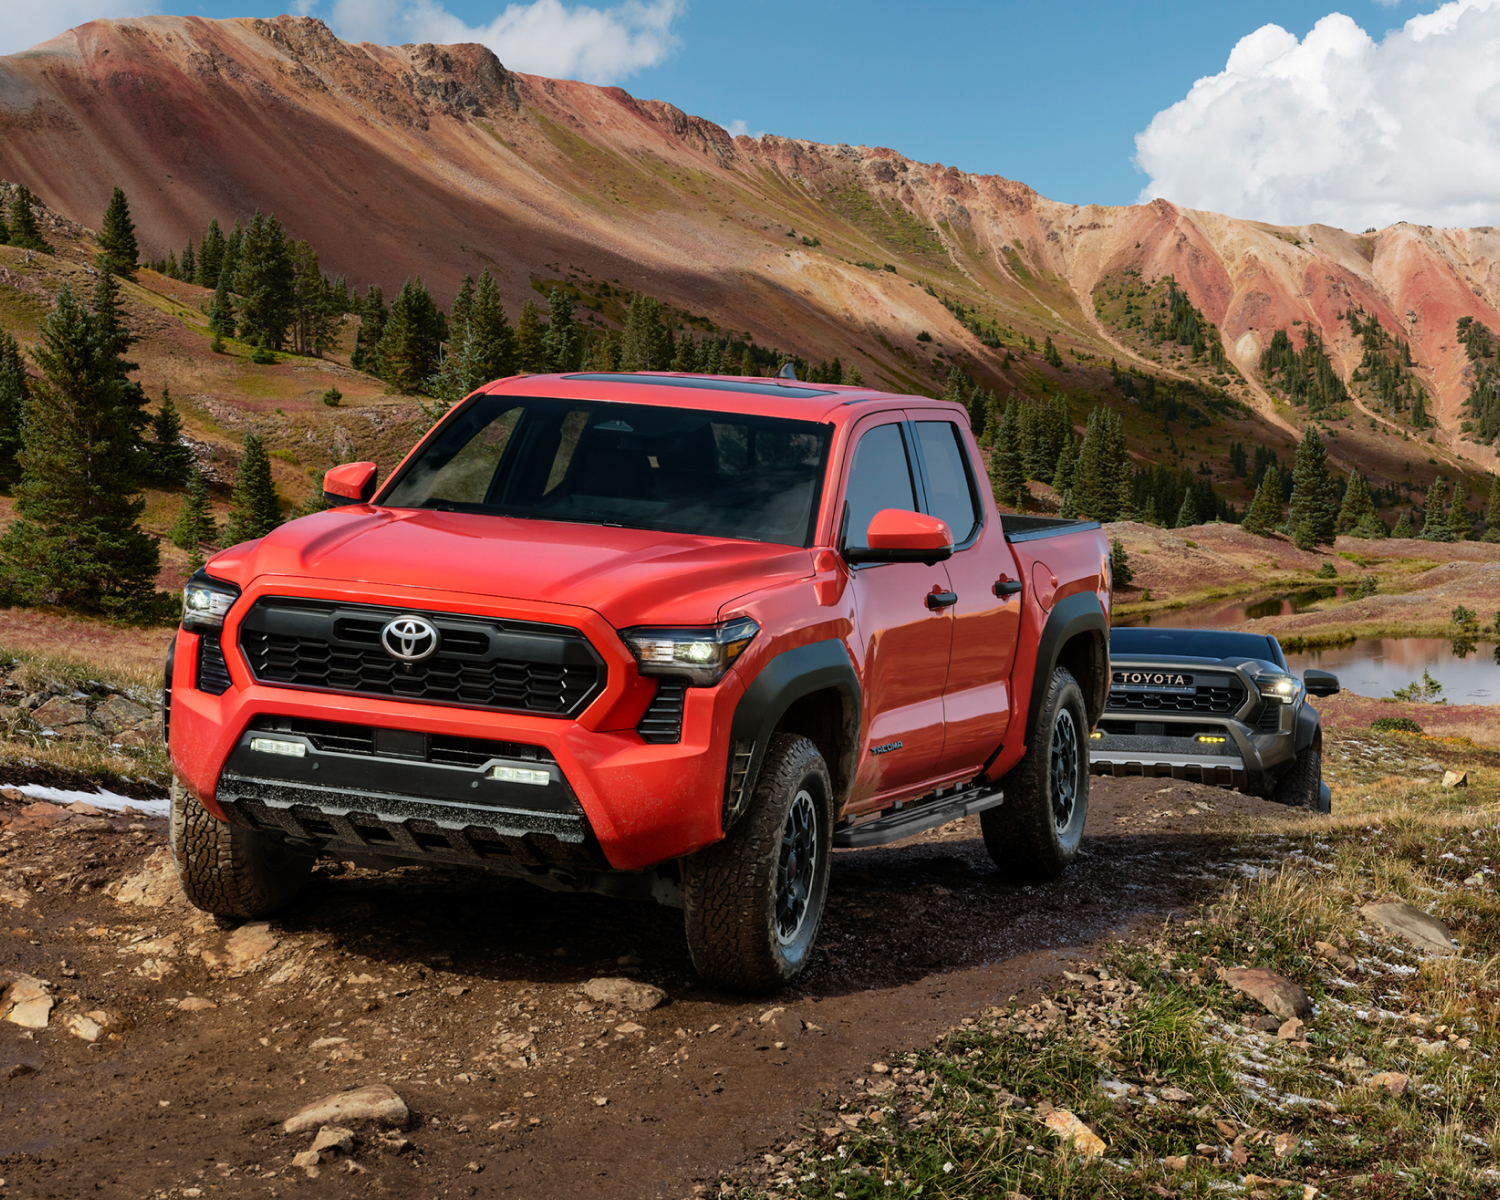 Tacoma TRD Off-Road Premium shown in Solar Octane and Tacoma Hybrid Trailhunter shown in Oxide Bronze